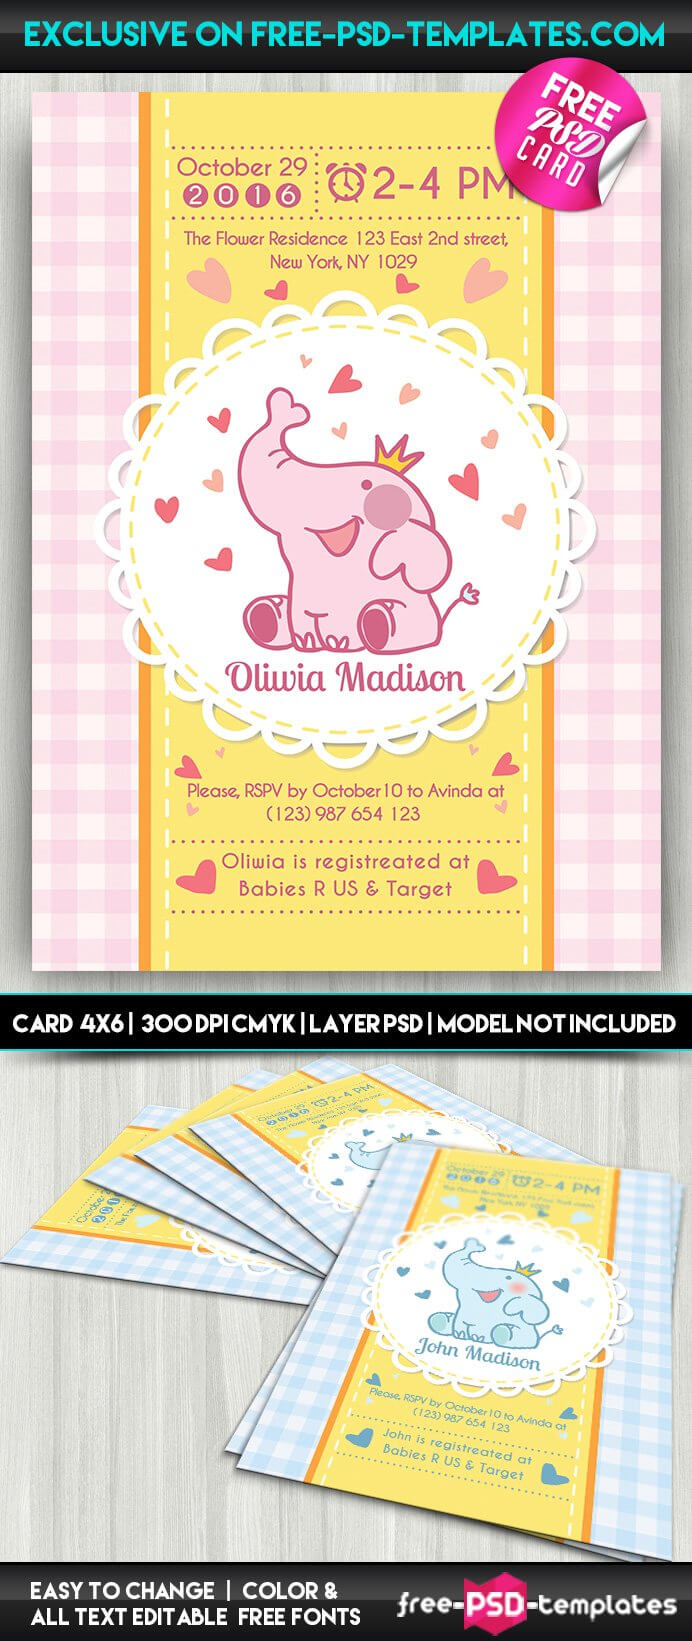 Baby Shower Card – Free Psd Card Template | Free Psd Templates With Baby Shower Flyer Template